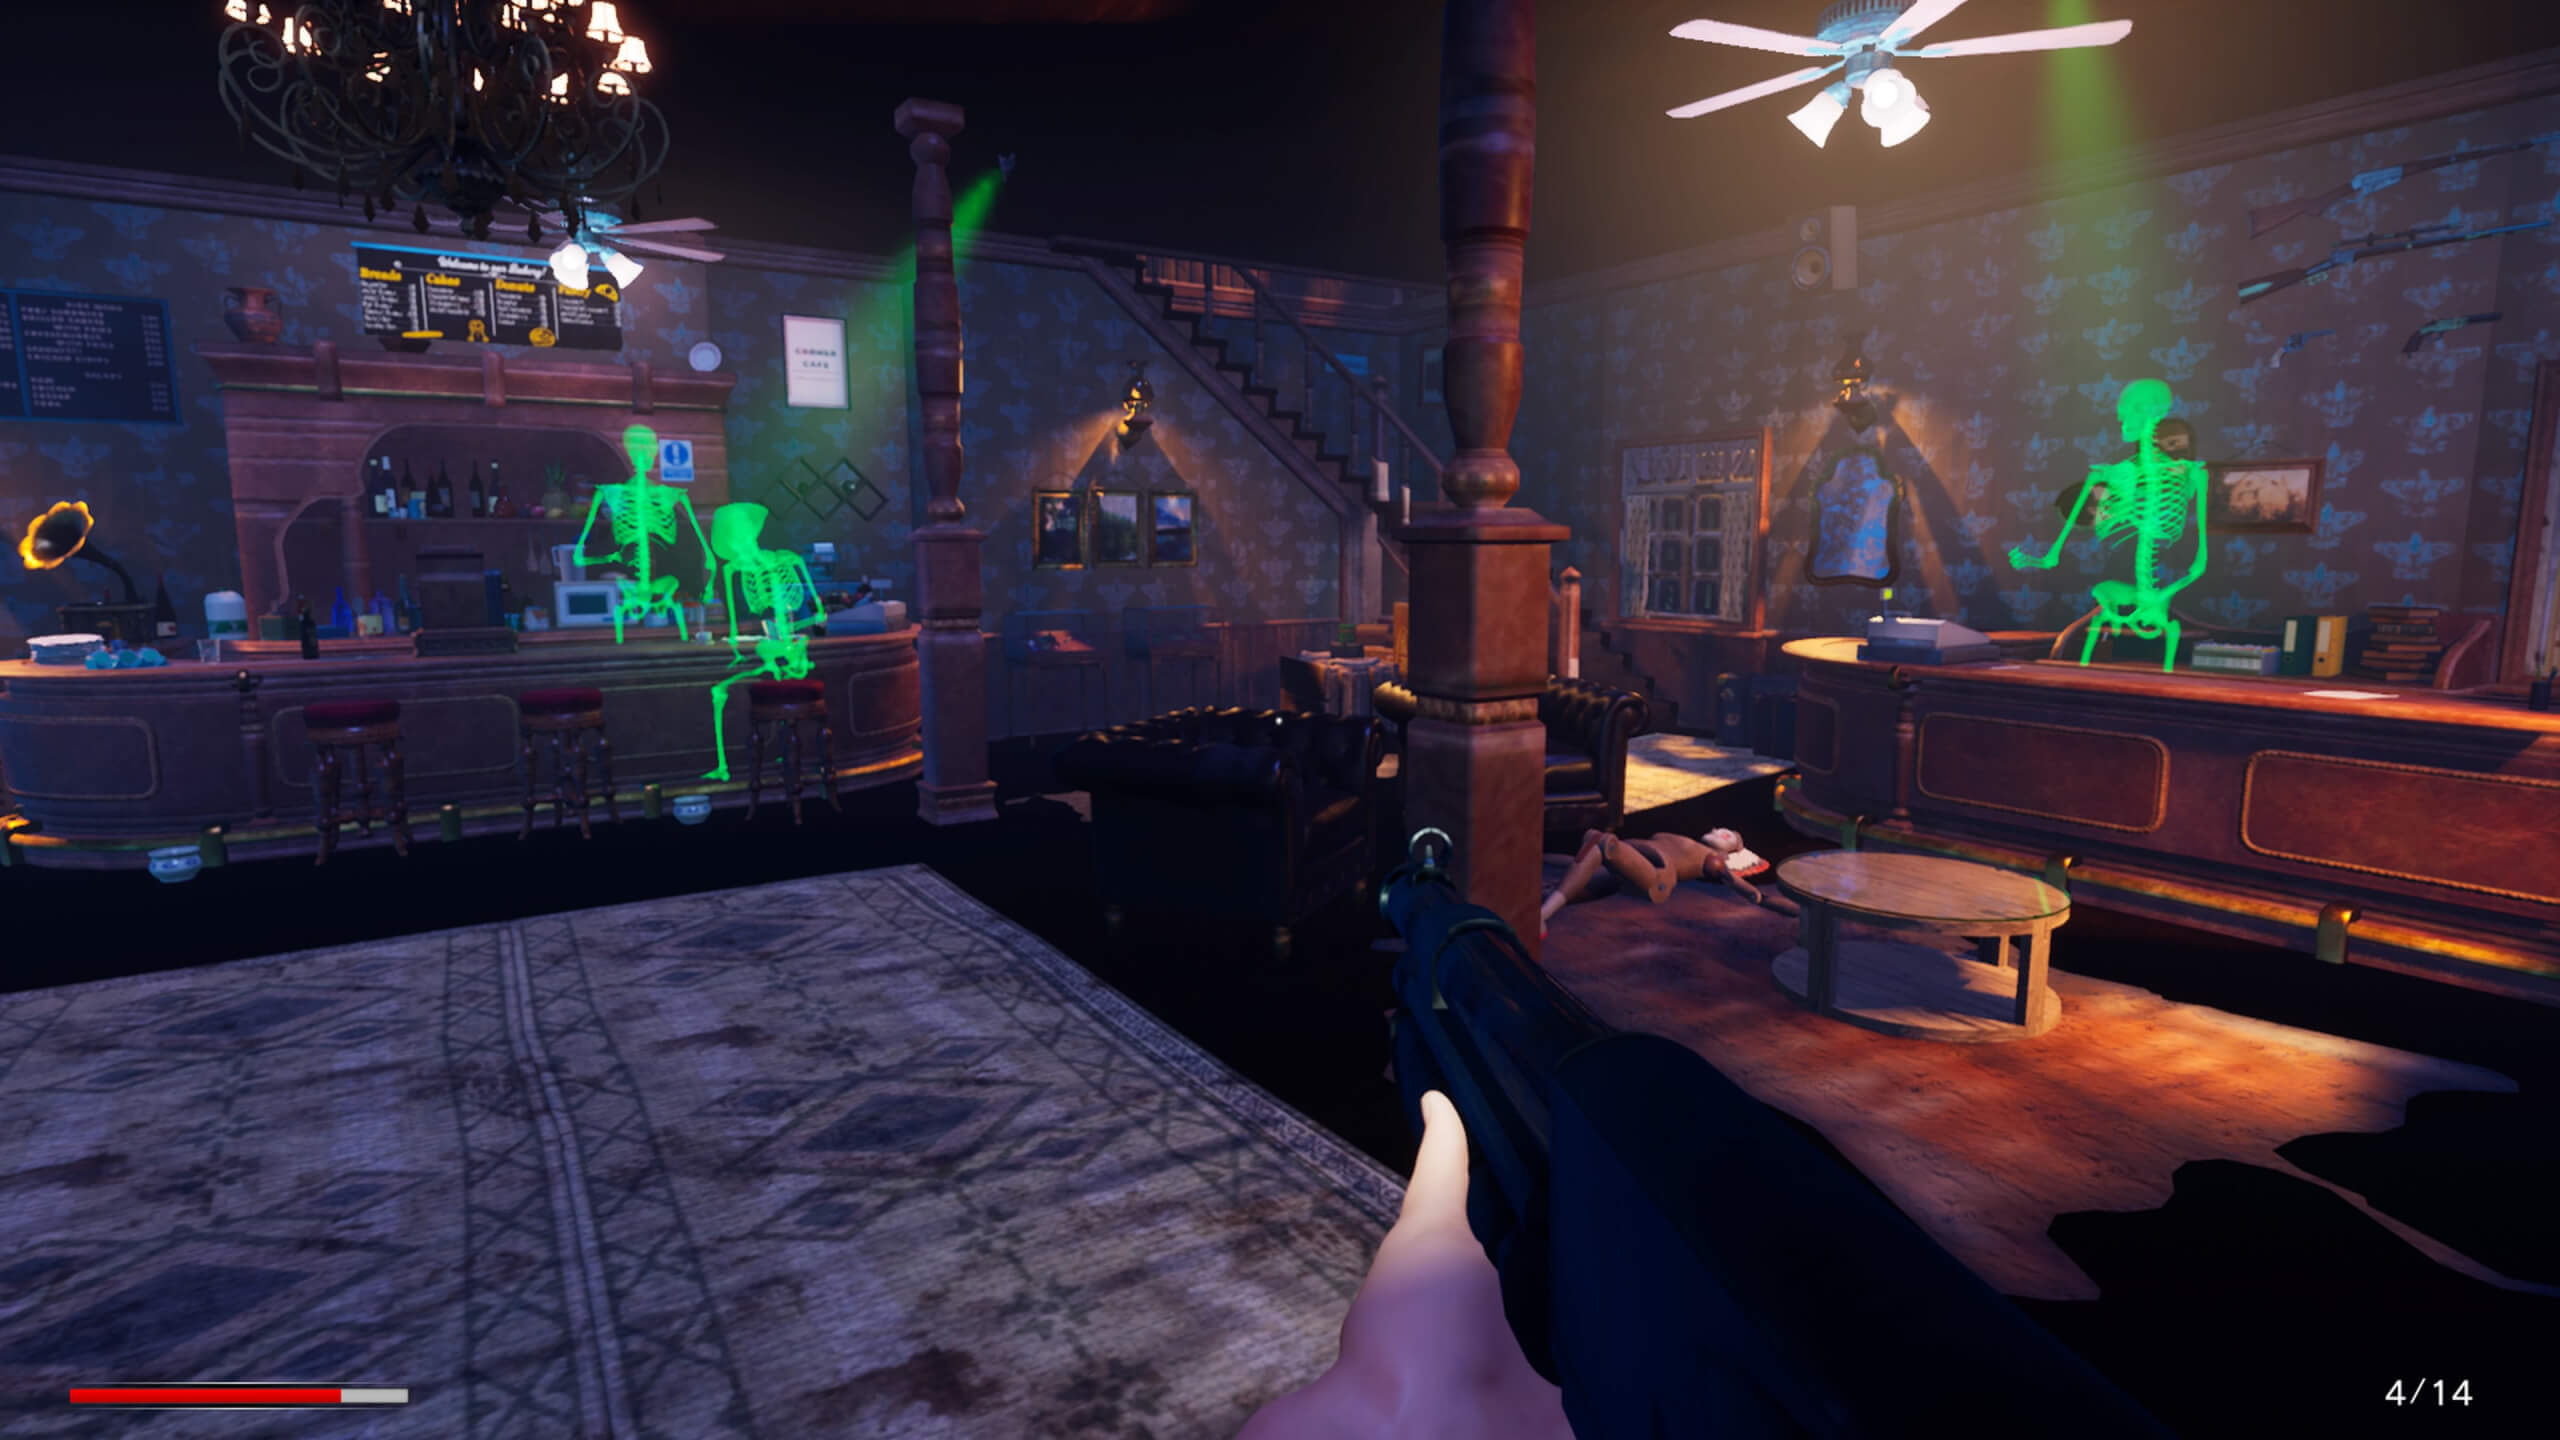 a shot of me in a saloon with various glowing green skeletons. There are a few puppet bodies on the floor and I am holding a shotgun. You can see a beam of green light pointing at the skeletons which helps to show they are holograms.